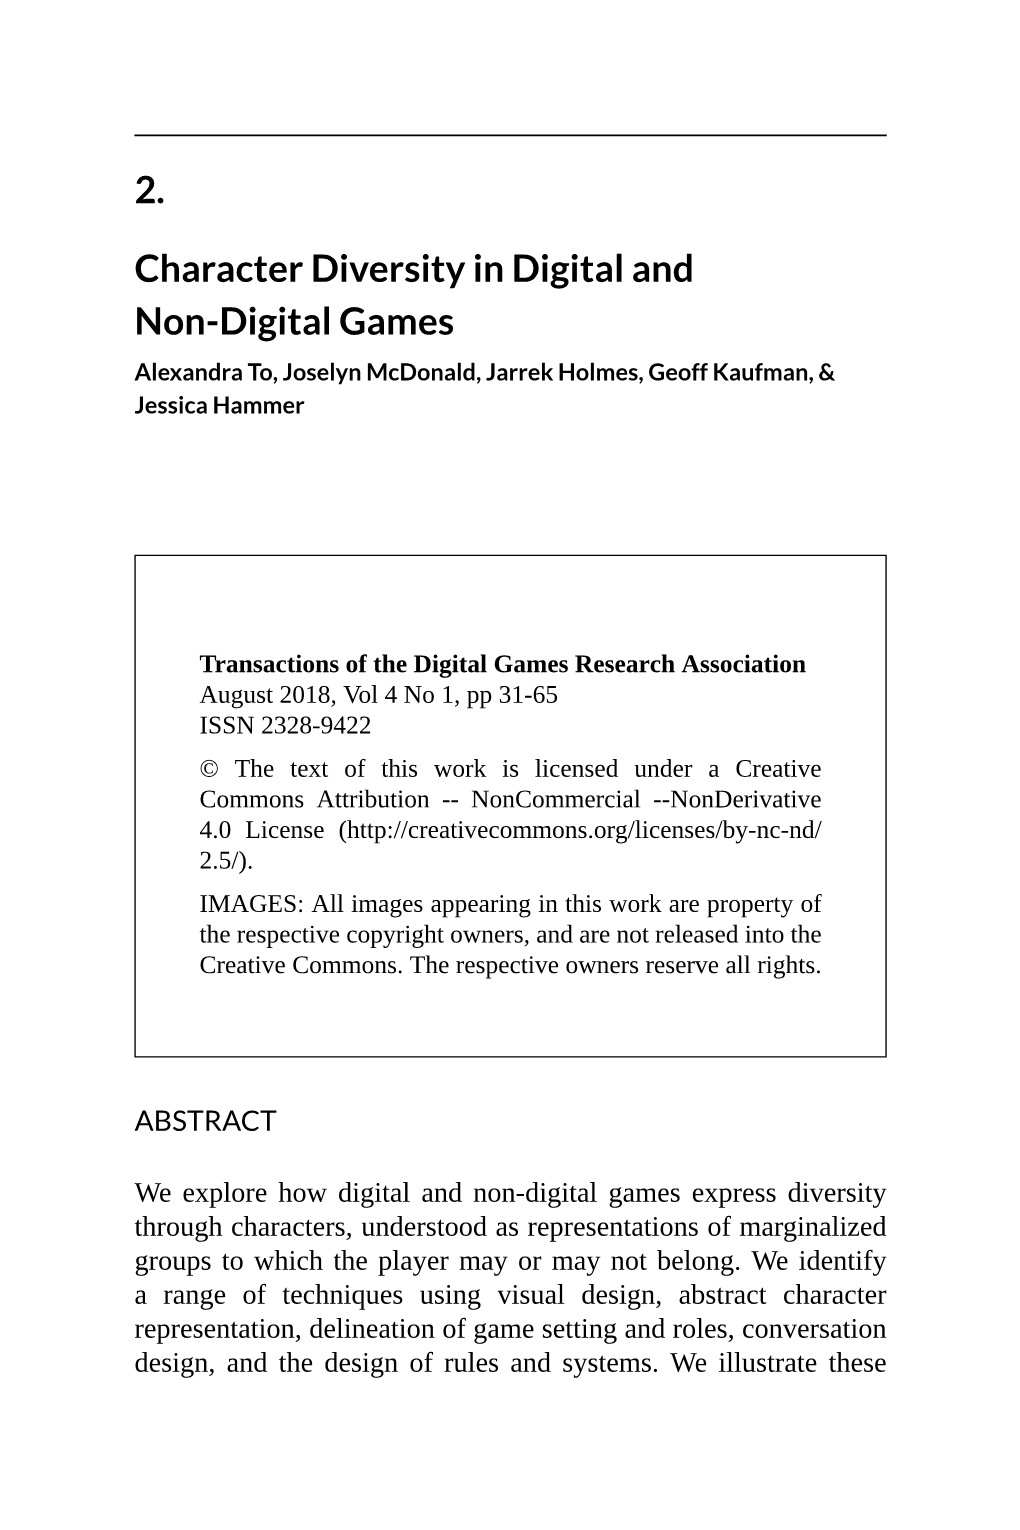 2. Character Diversity in Digital and Non-Digital Games